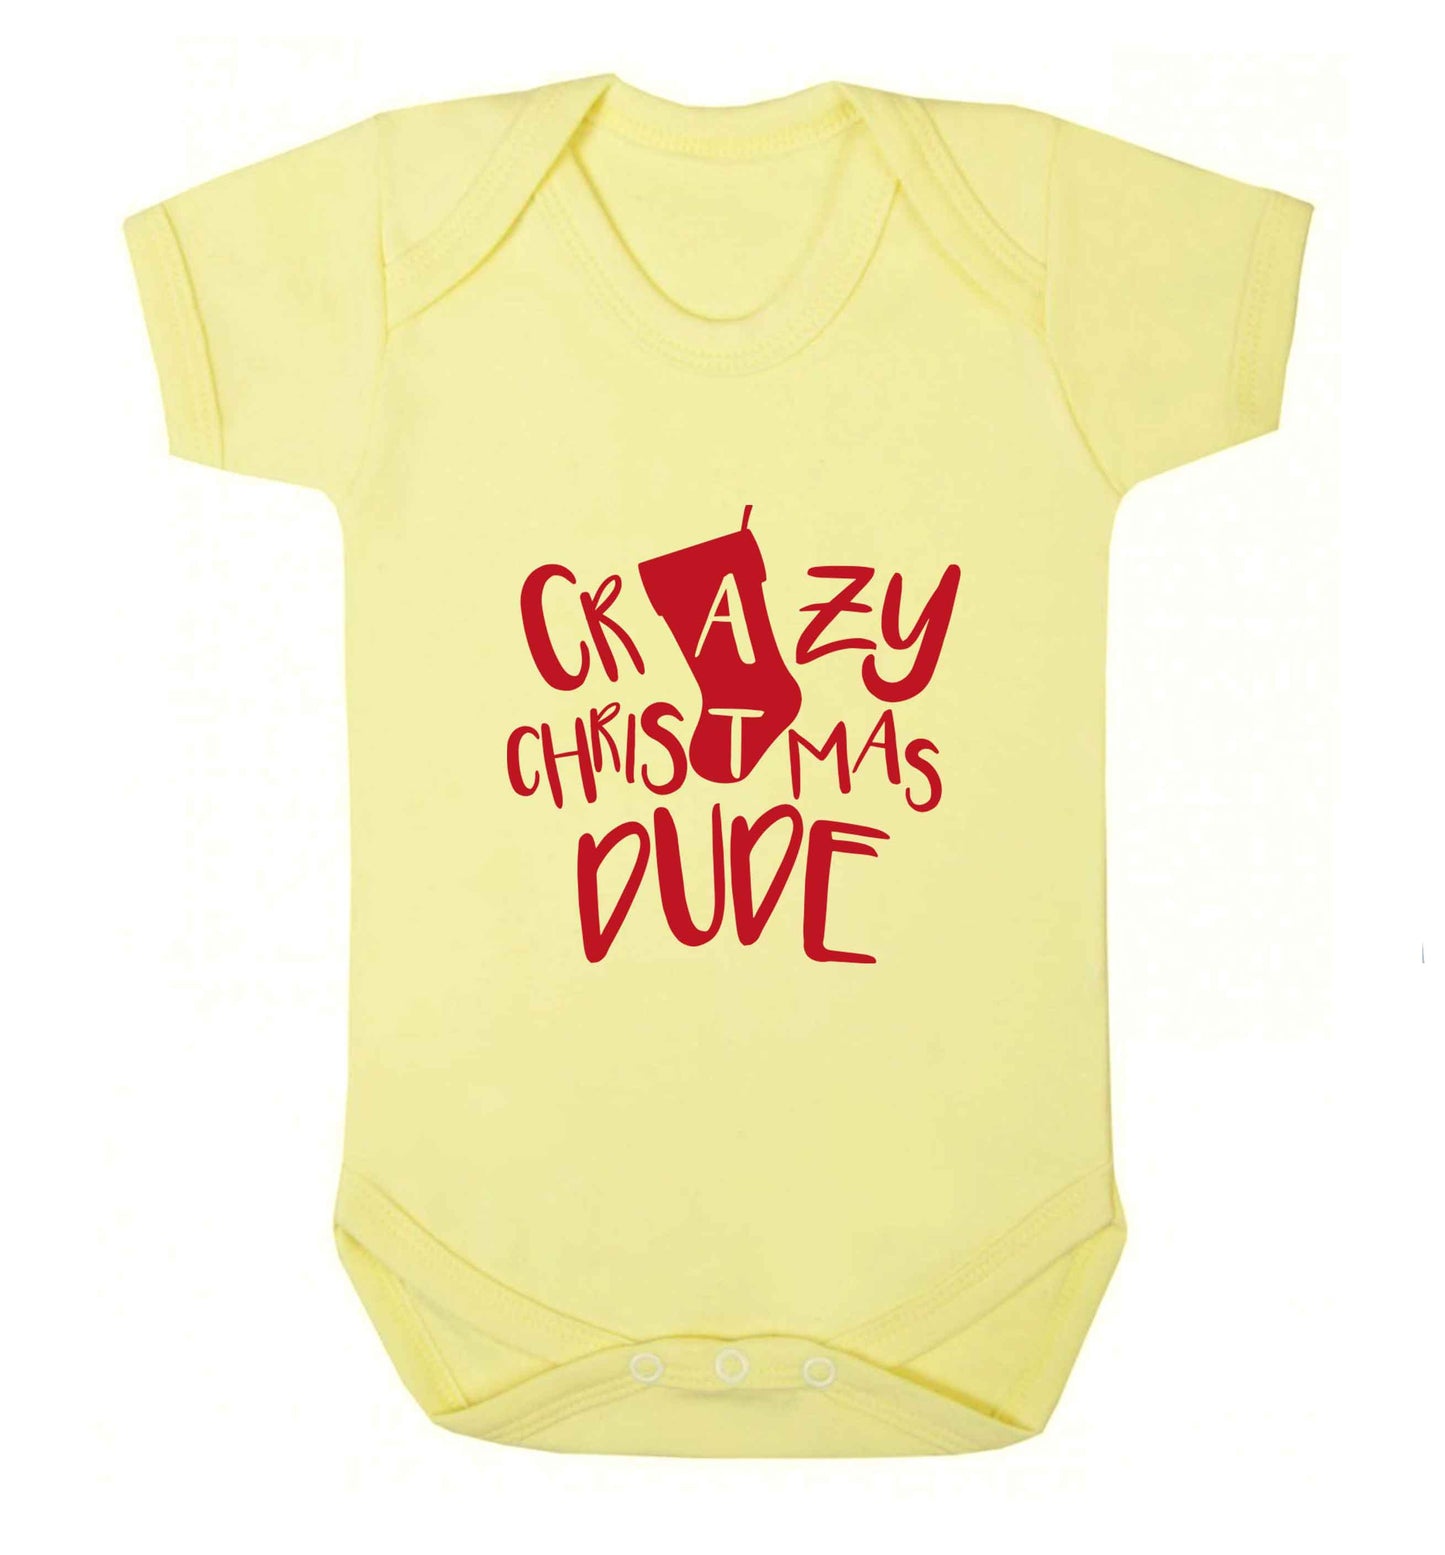 Crazy Christmas Dude baby vest pale yellow 18-24 months